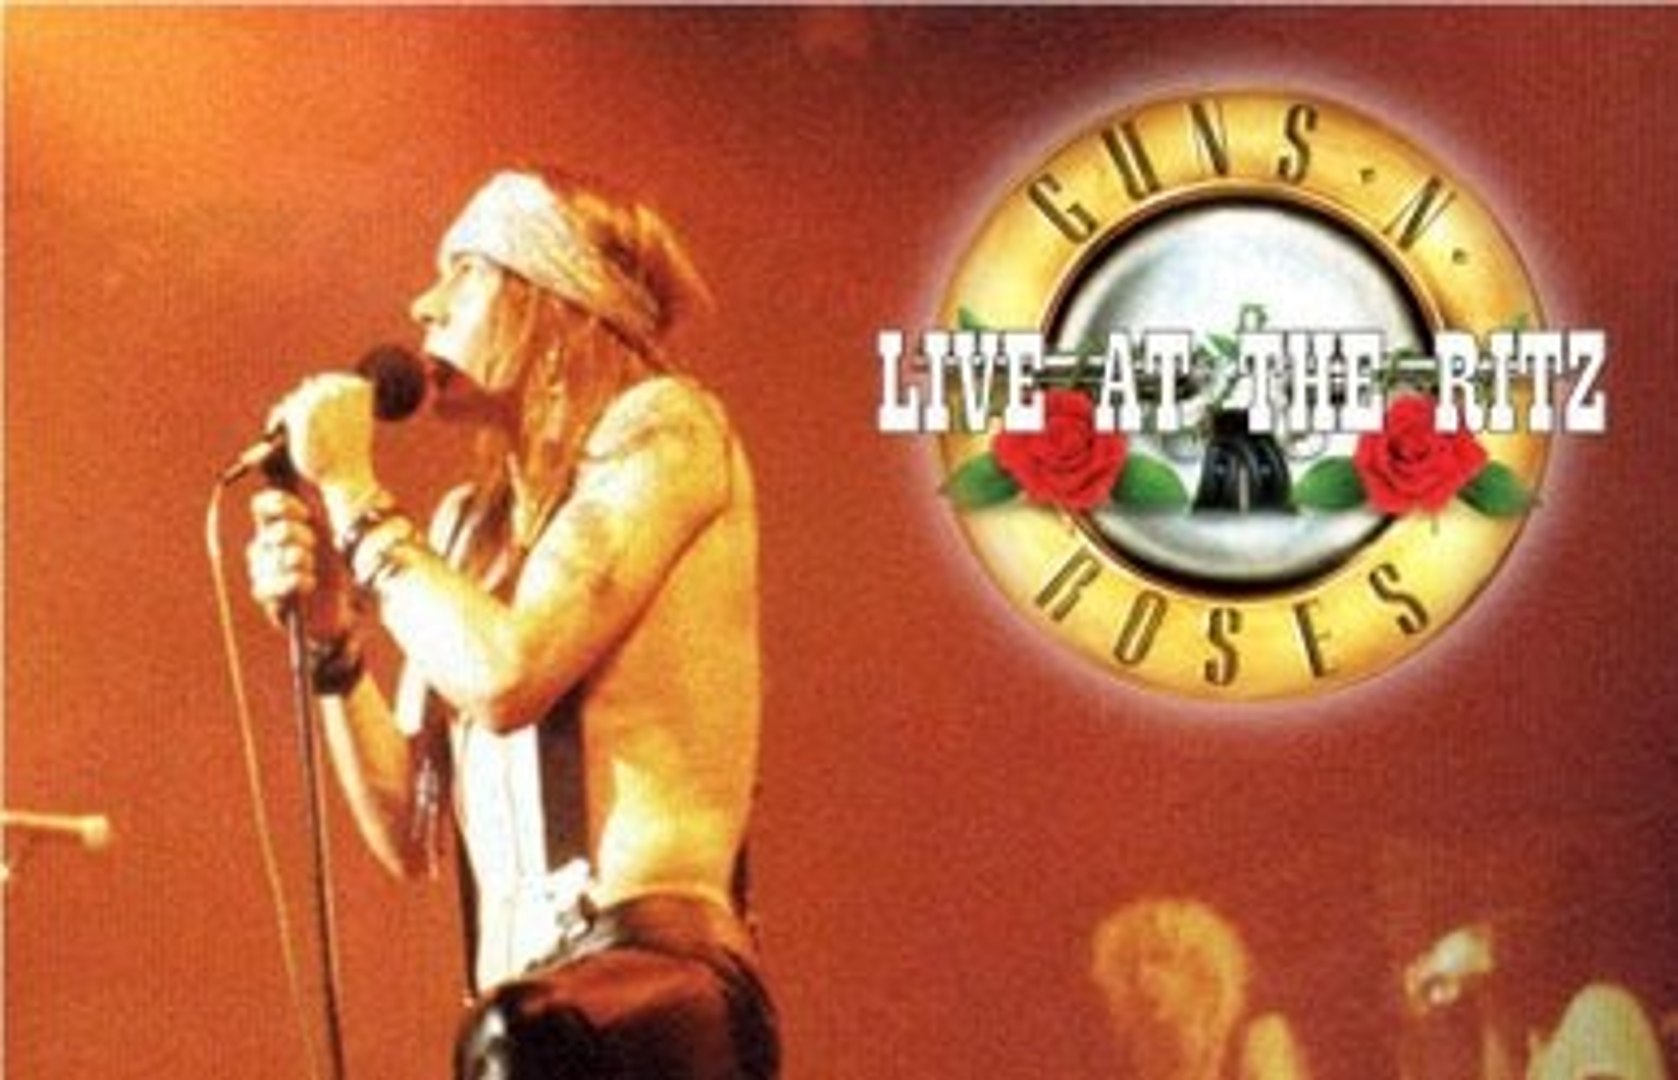 Guns N' Roses live at The Ritz 1988 - Full concert - video Dailymotion